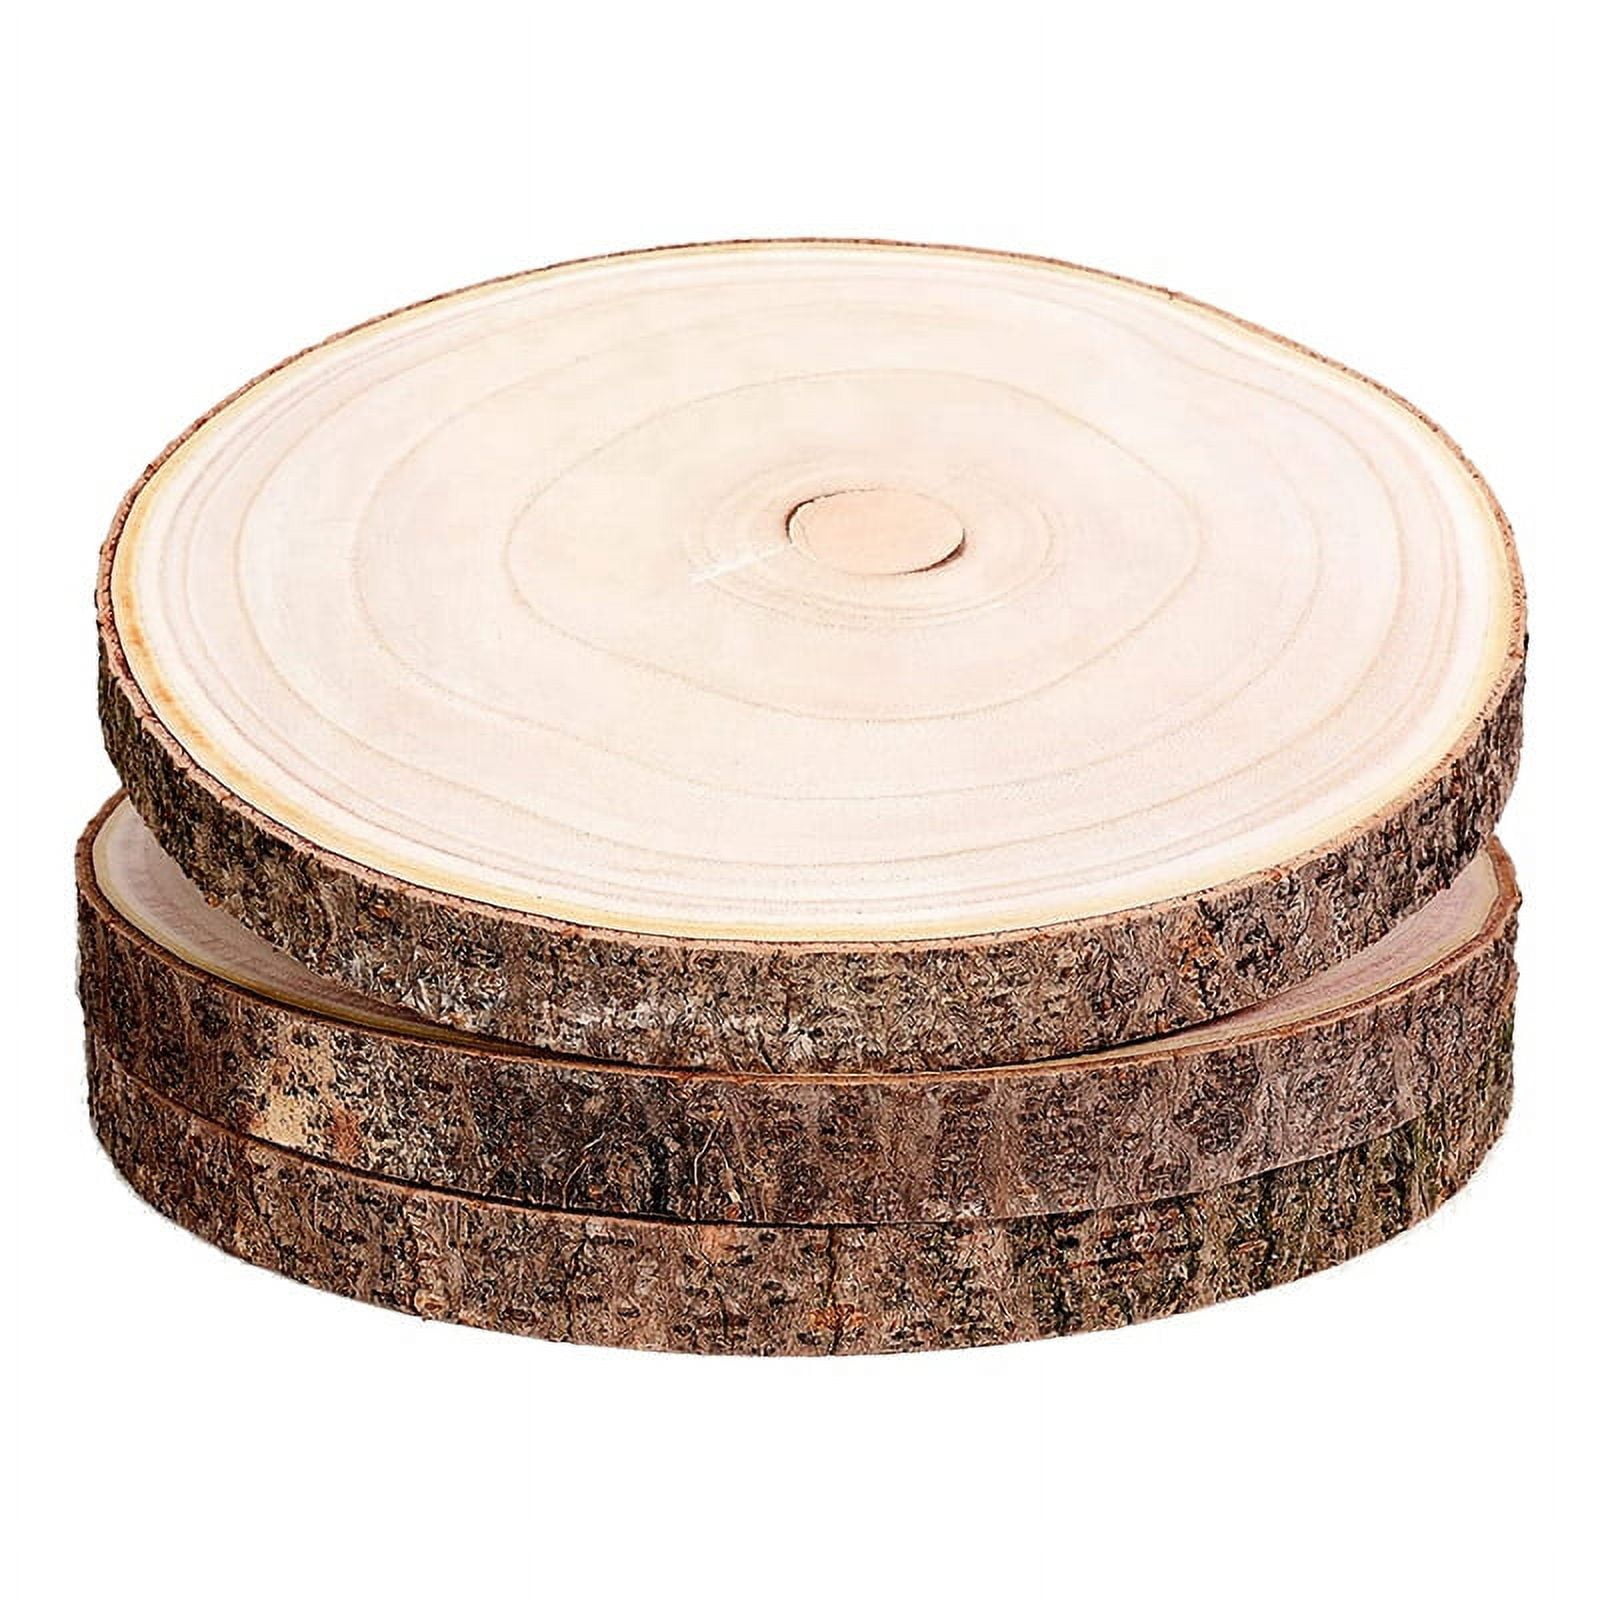 Tosuced Wooden Circles, 20 Pieces 11.8 Inch Unfinished Round Wood Slices  for Pyrography, Painting and Wedding Decorations